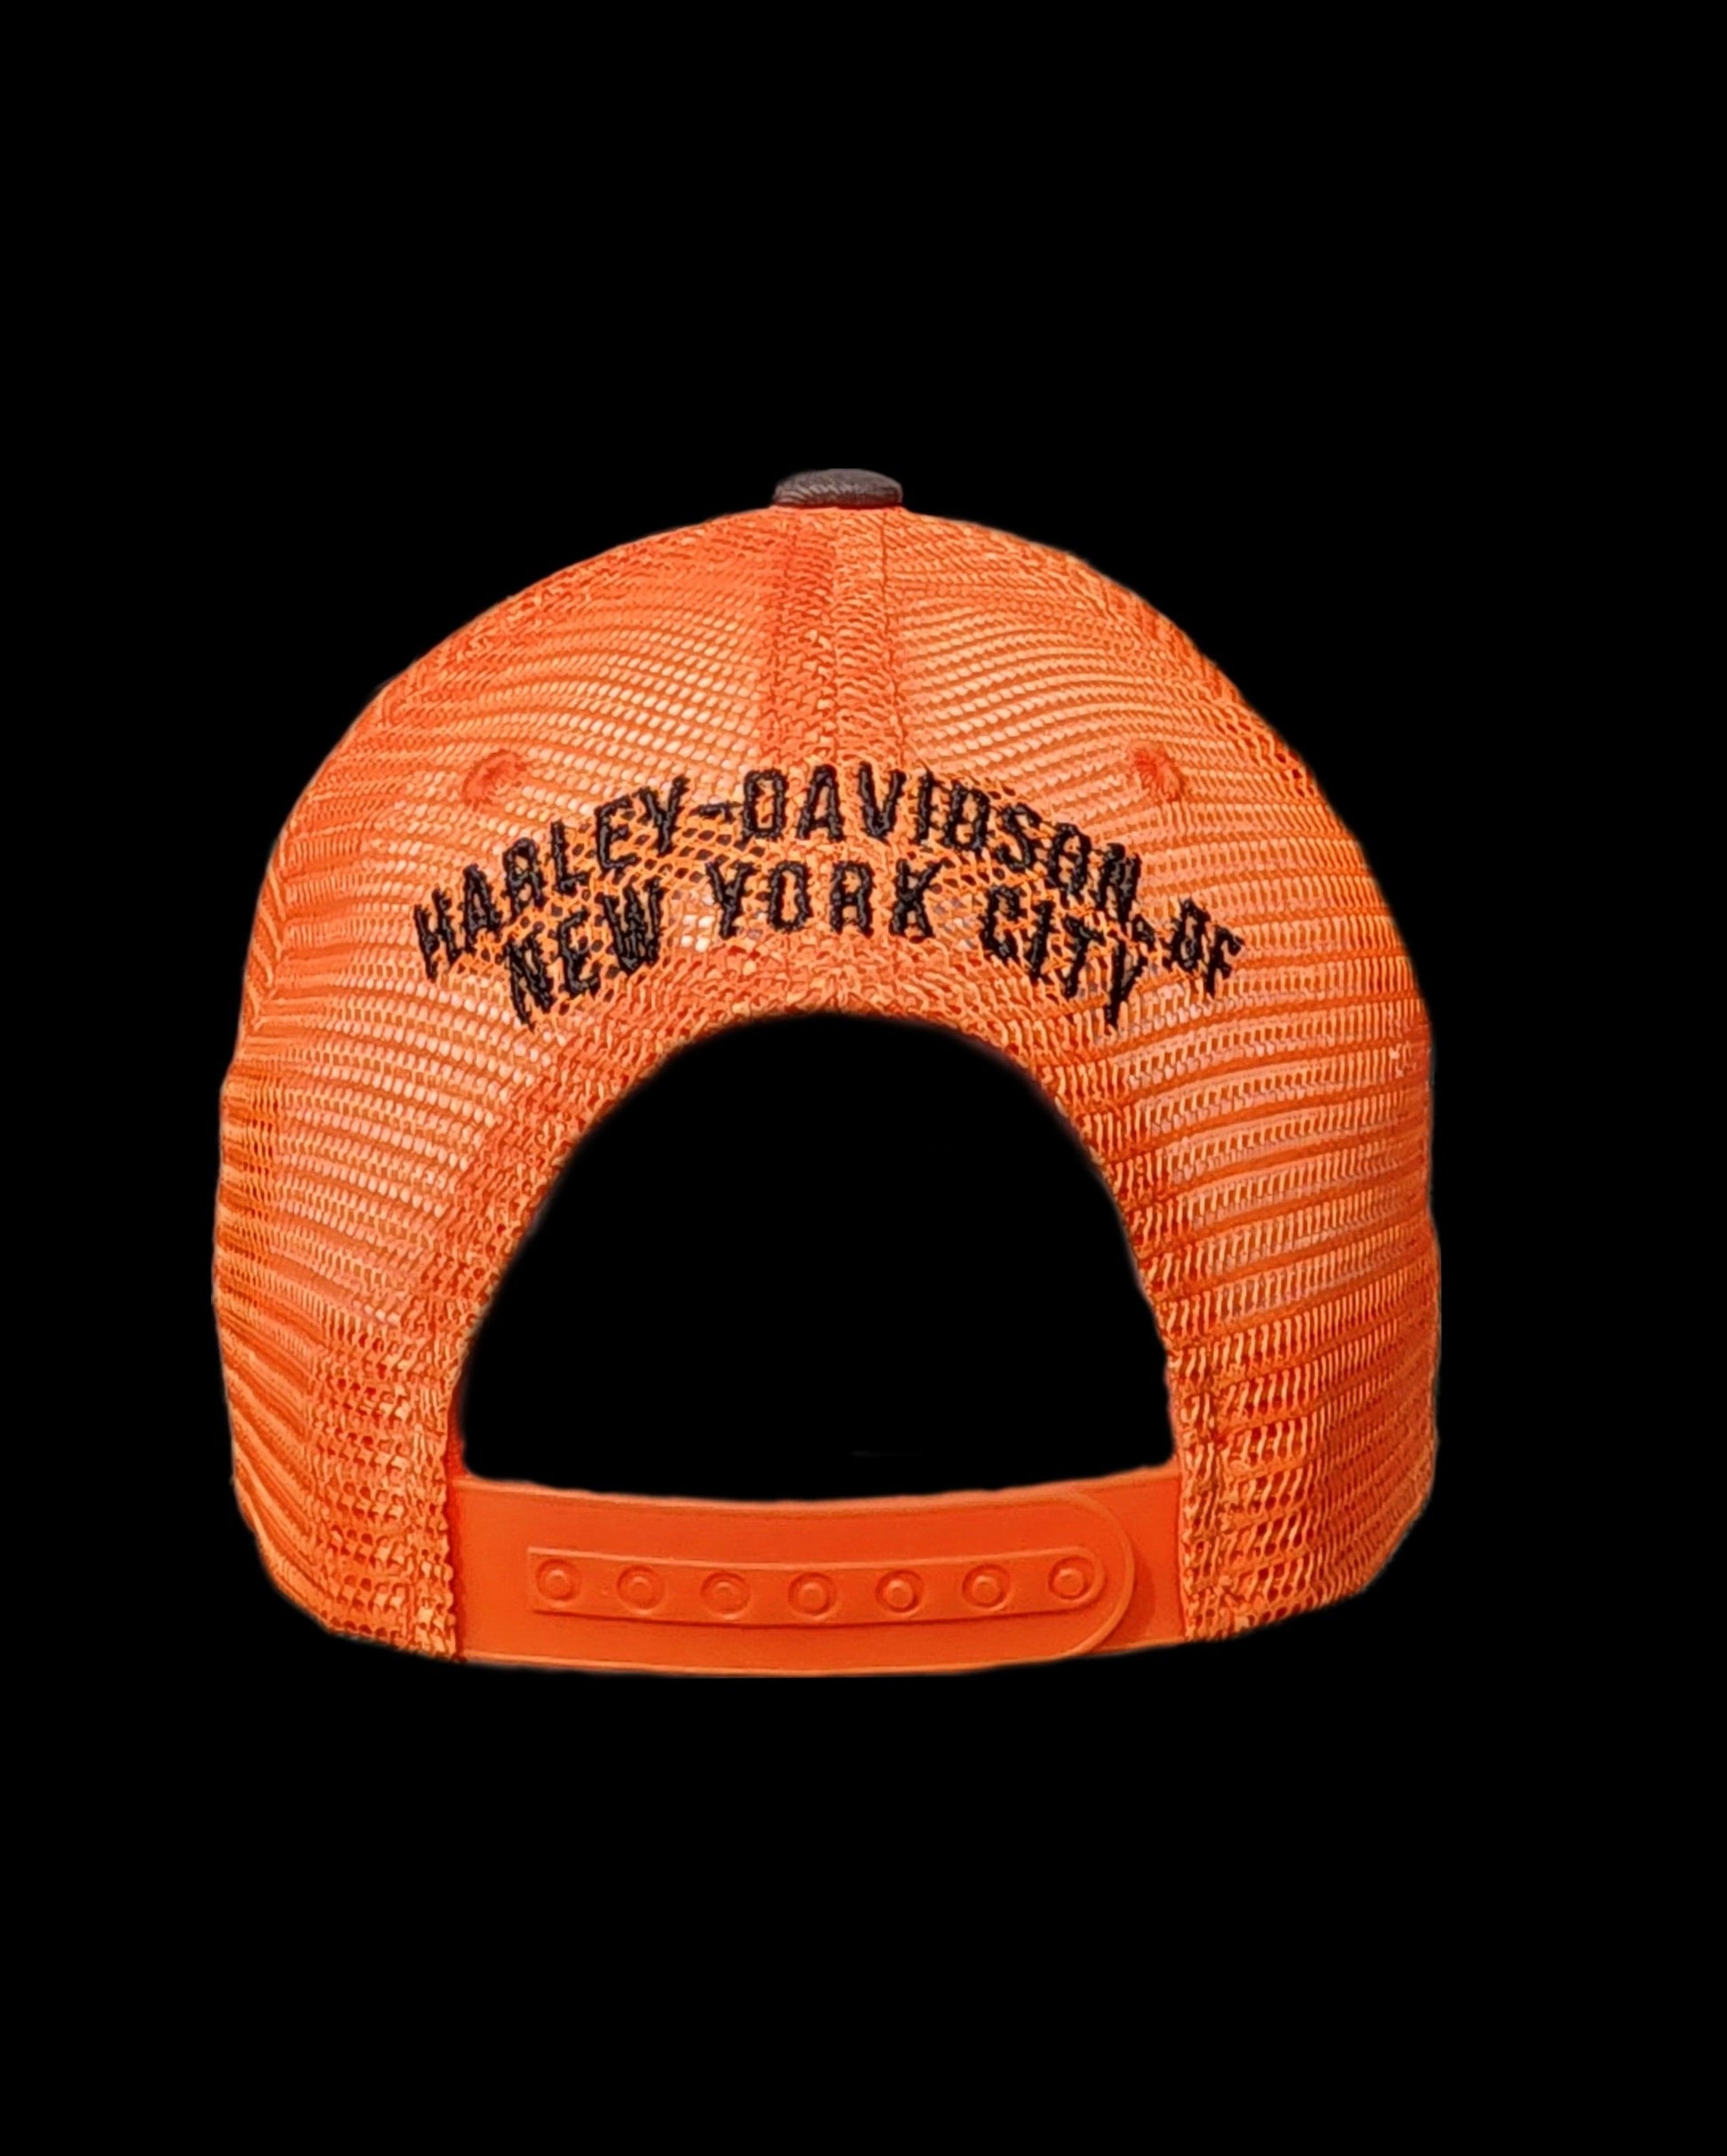 Harley Davidson Of NYC Dealer Snitches Baseball Cap - Harley Davidson Of Nyc